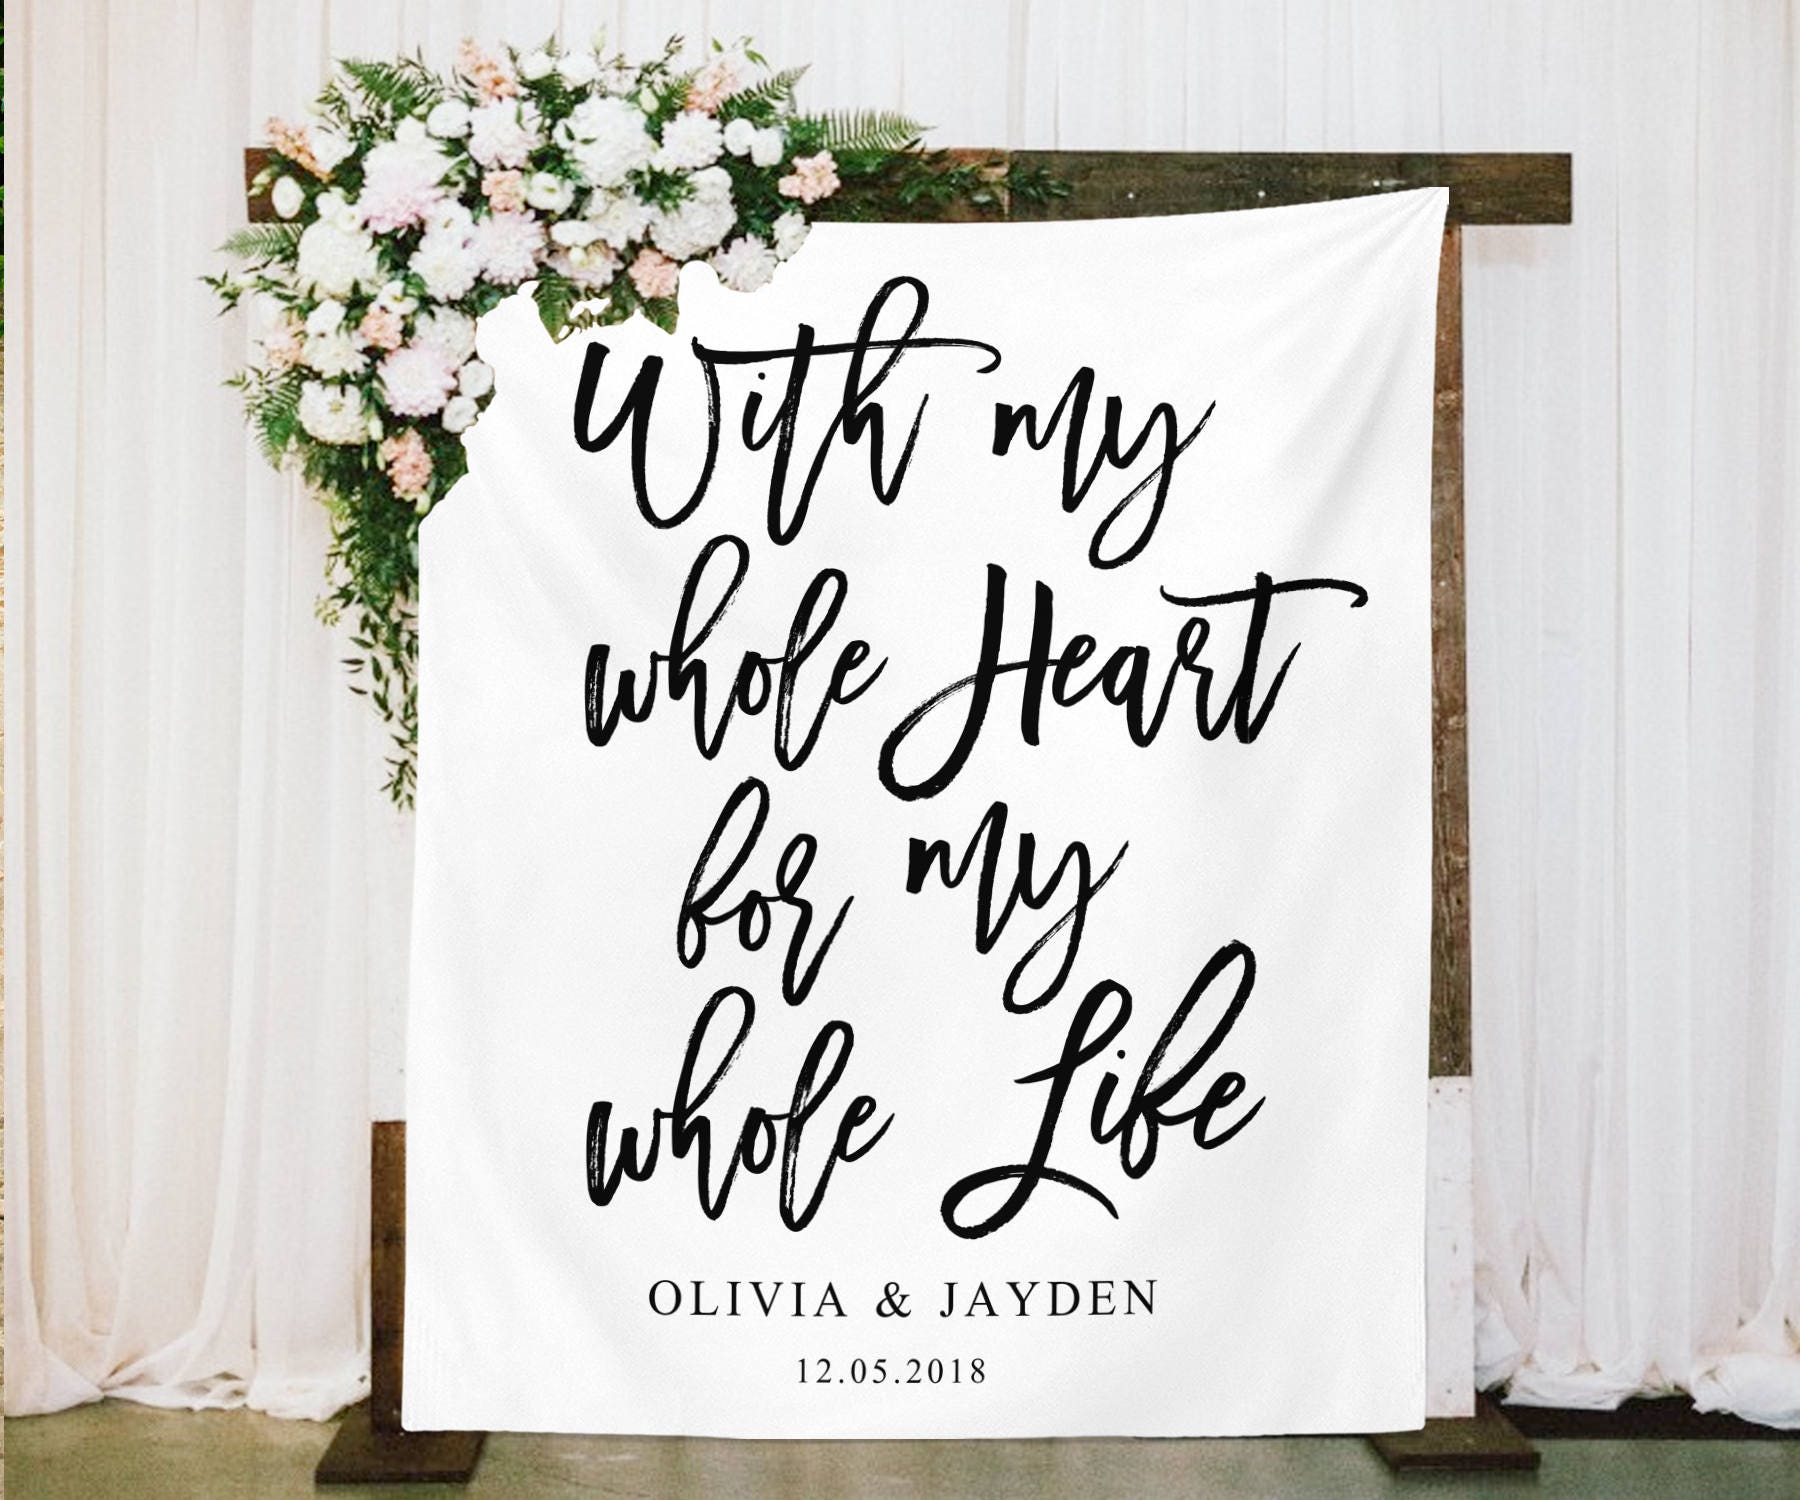 Rustic Wedding Backdrop Decoration With My Whole Heart For My Etsy